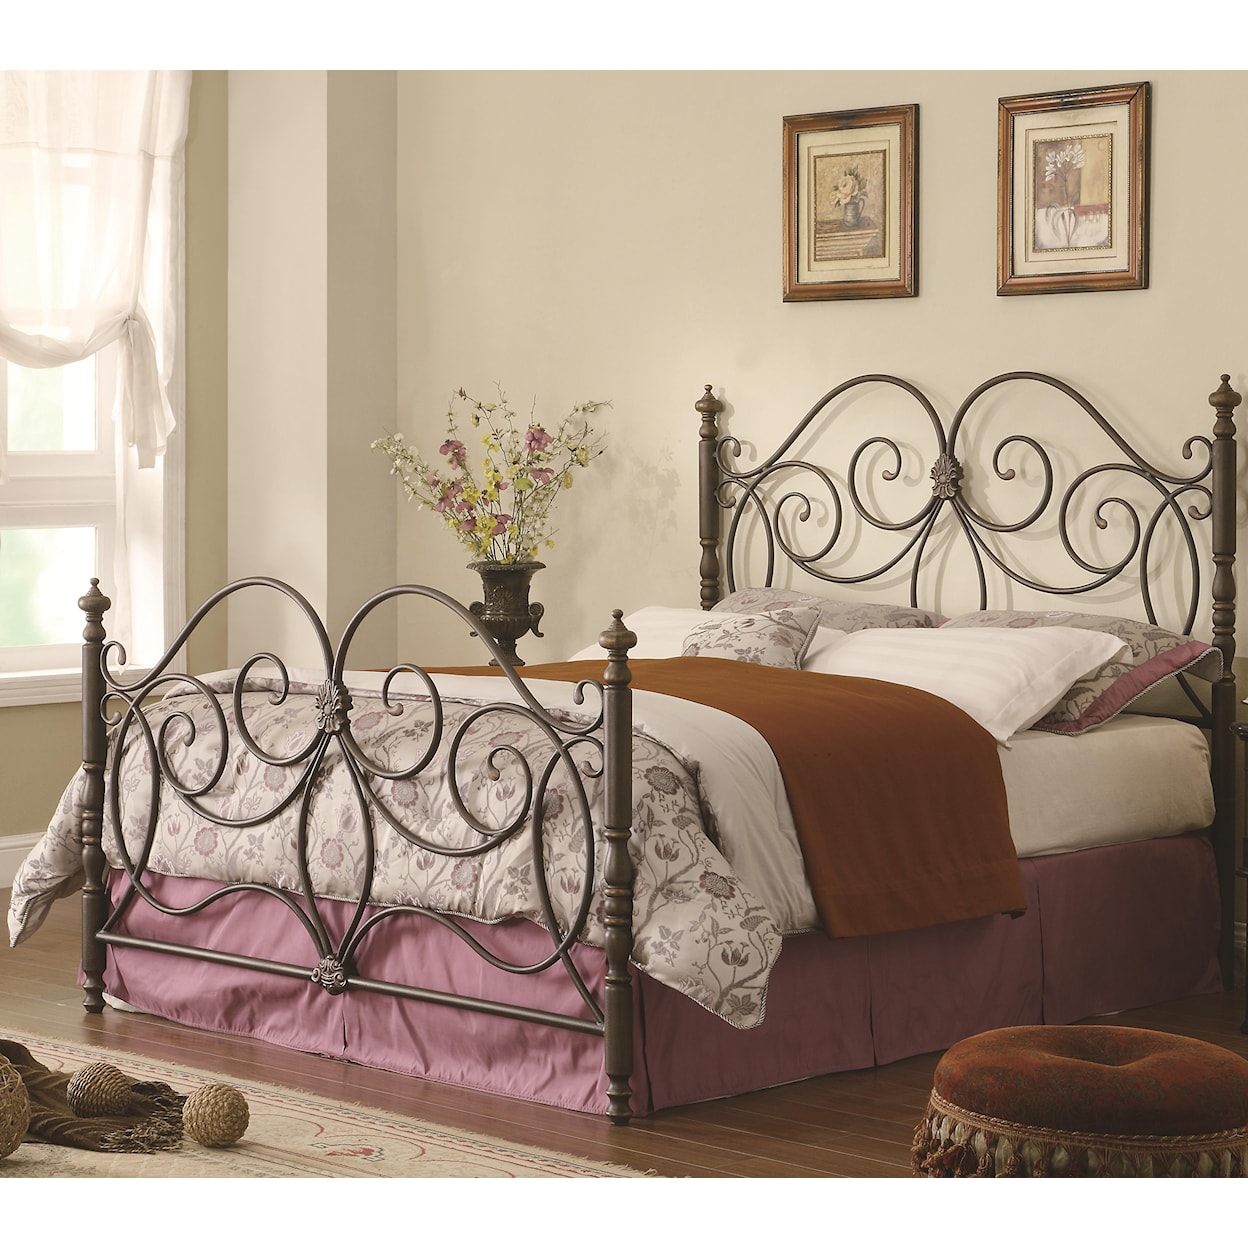 Michael Alan CSR Select Iron Beds and Headboards Queen Iron Bed